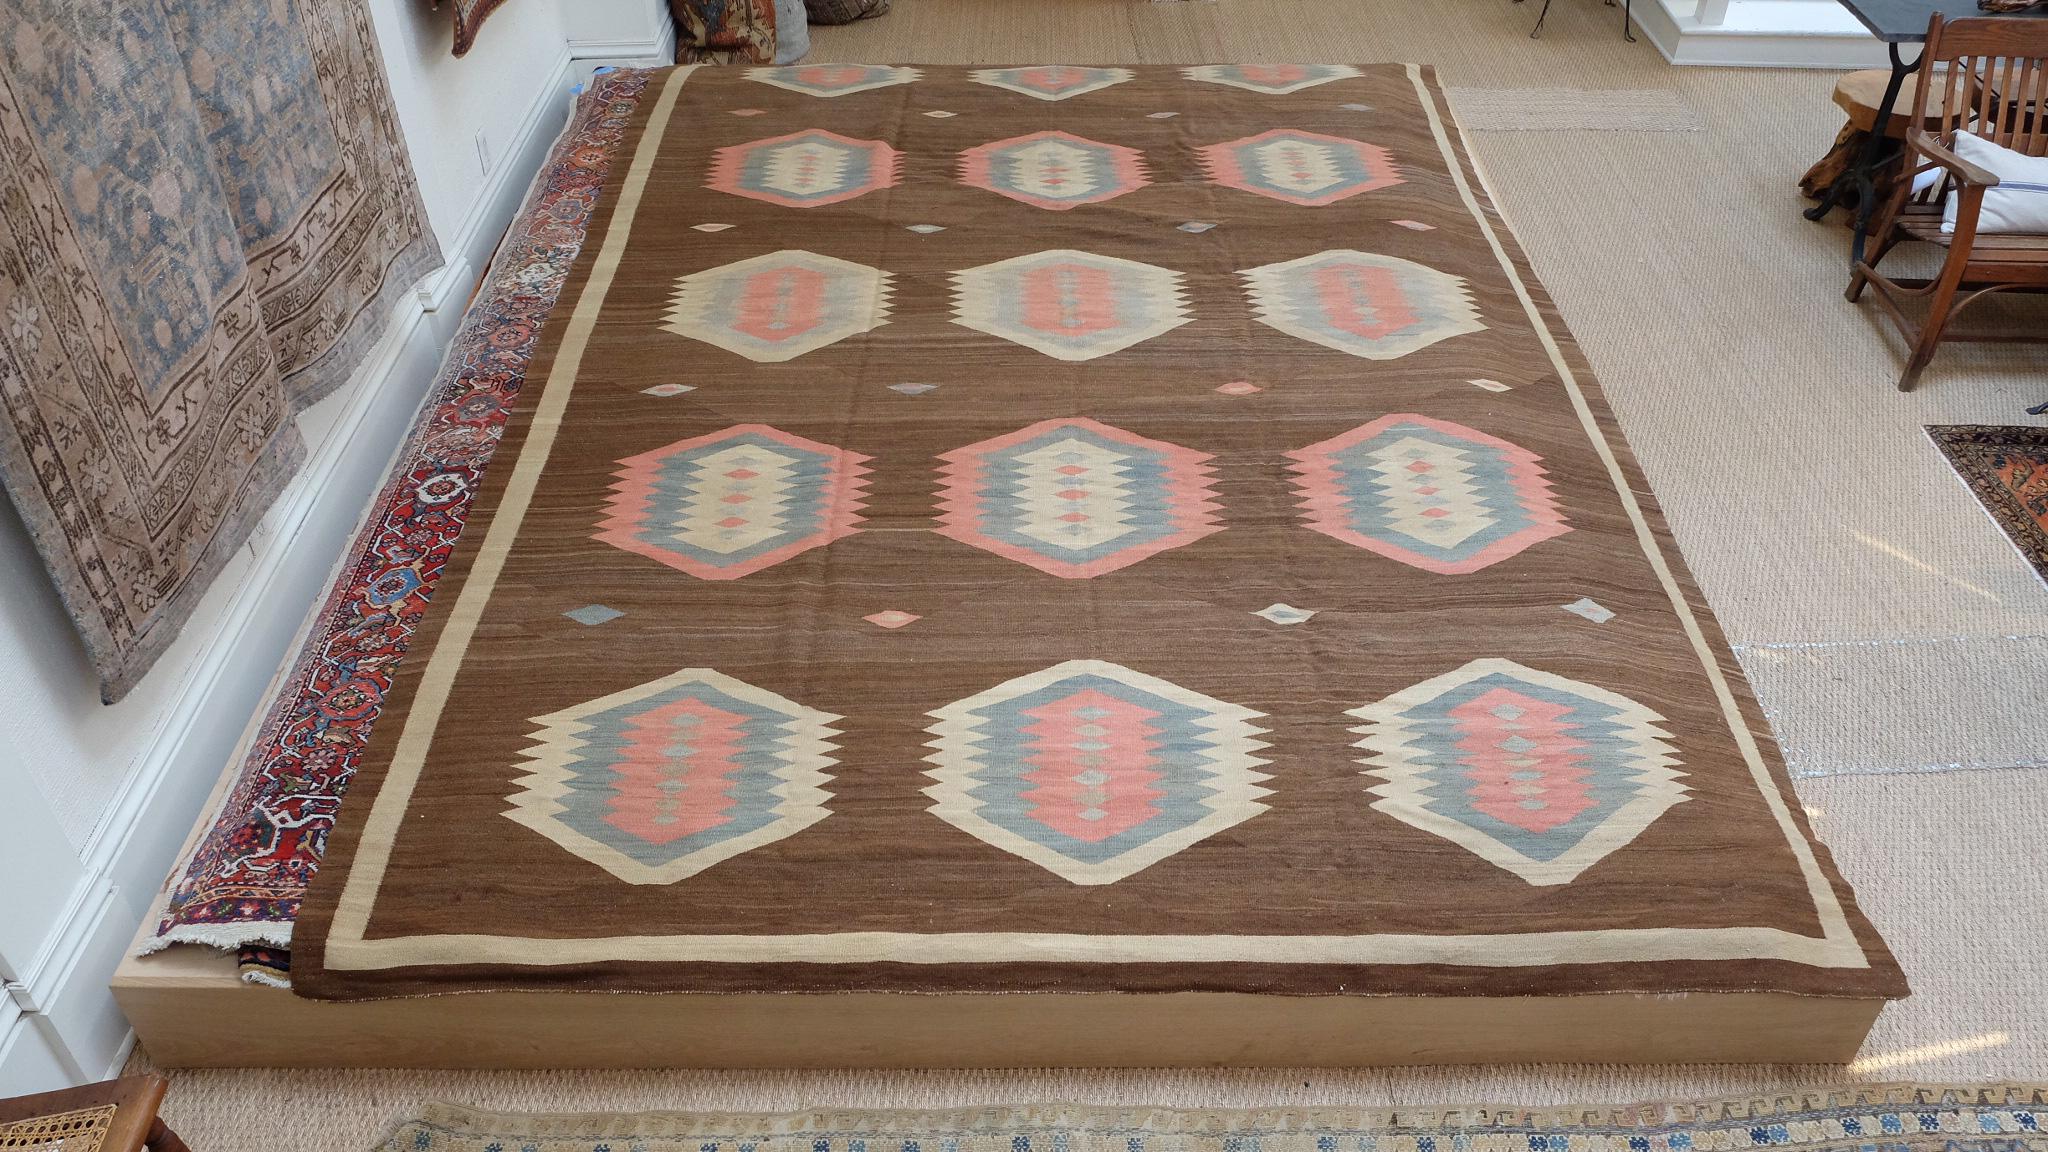 A finely woven Kilim in a rare size and coloration. An unusual rich camel brown field and oversized design in soft pink, gray and ivory. In very good condition with a nice weight. Secured sides and ends. Naturally dyed and handwoven in the light